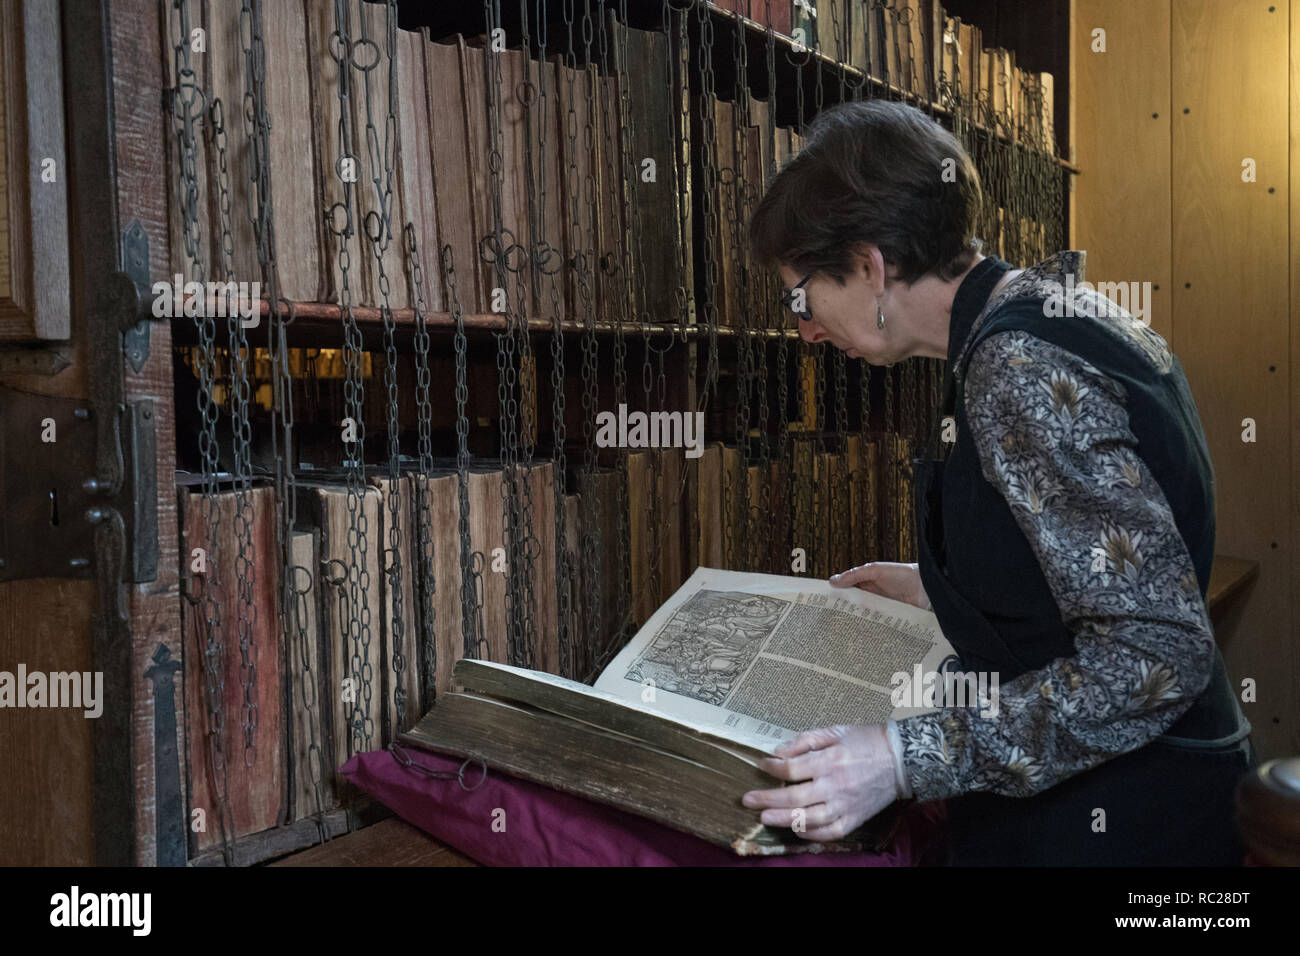 Dr Rosemary Firman inspects Foxe's Book of Martyrs during the annual clean of the Hereford Chained Library at Hereford Cathedral, Herefordshire. The chaining of books was the most widespread and effective security system in European libraries from the Middle Ages to the 18th century, and Hereford Cathedral's 17th-century Chained Library is the largest to survive with all its chains, rods and locks intact. Stock Photo